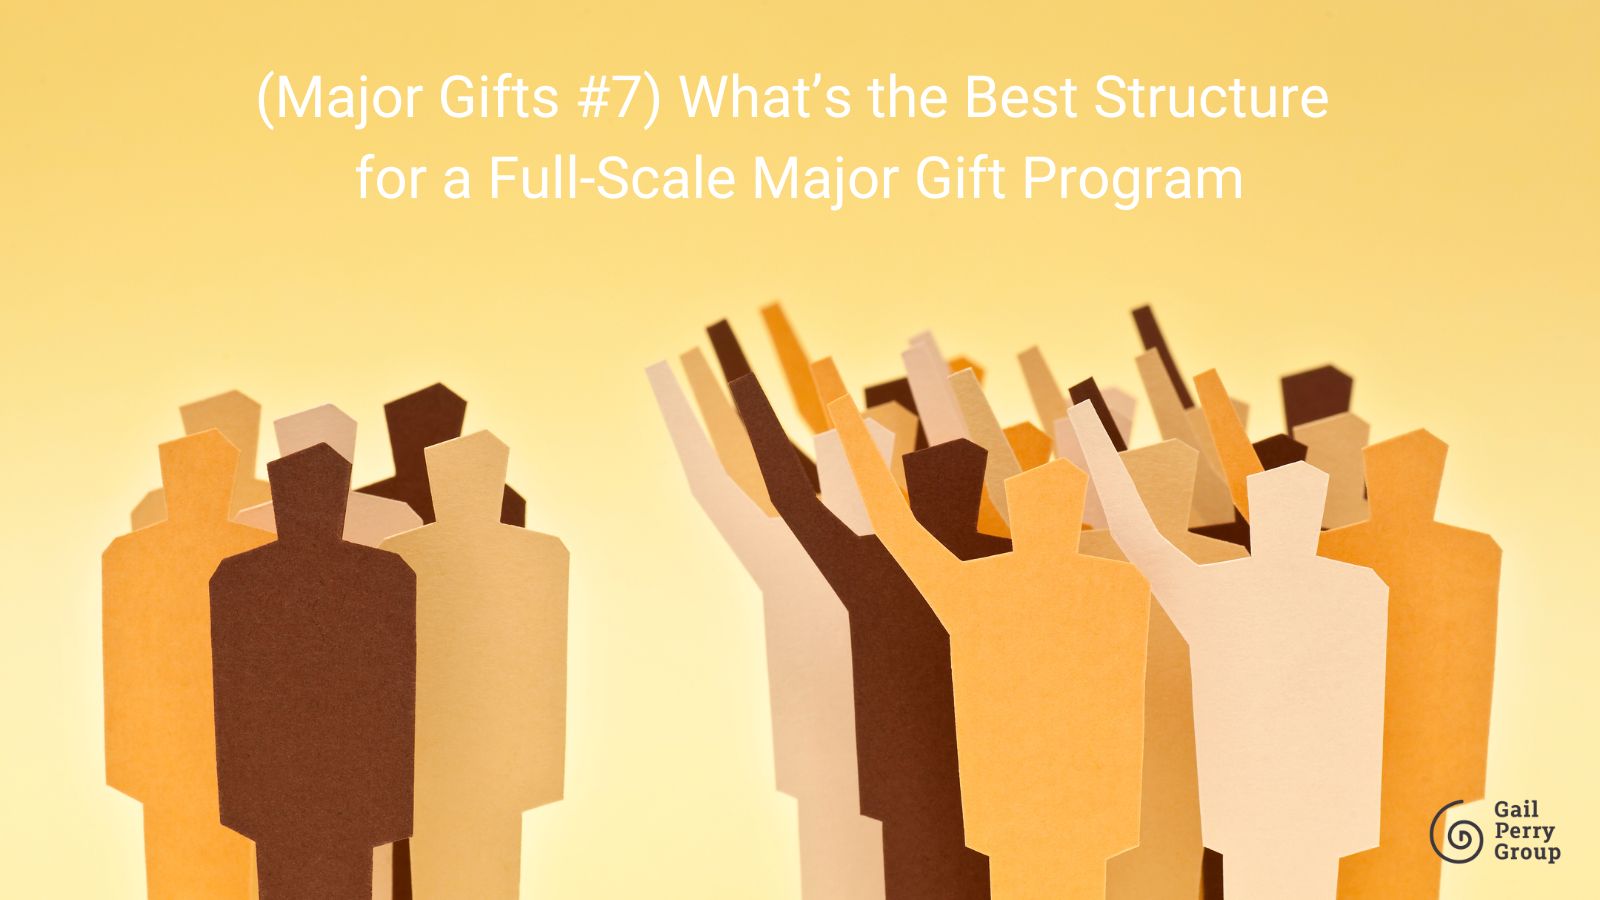 (Major Gifts #7) What’s the Best Structure for a Full-Scale Major Gift Program